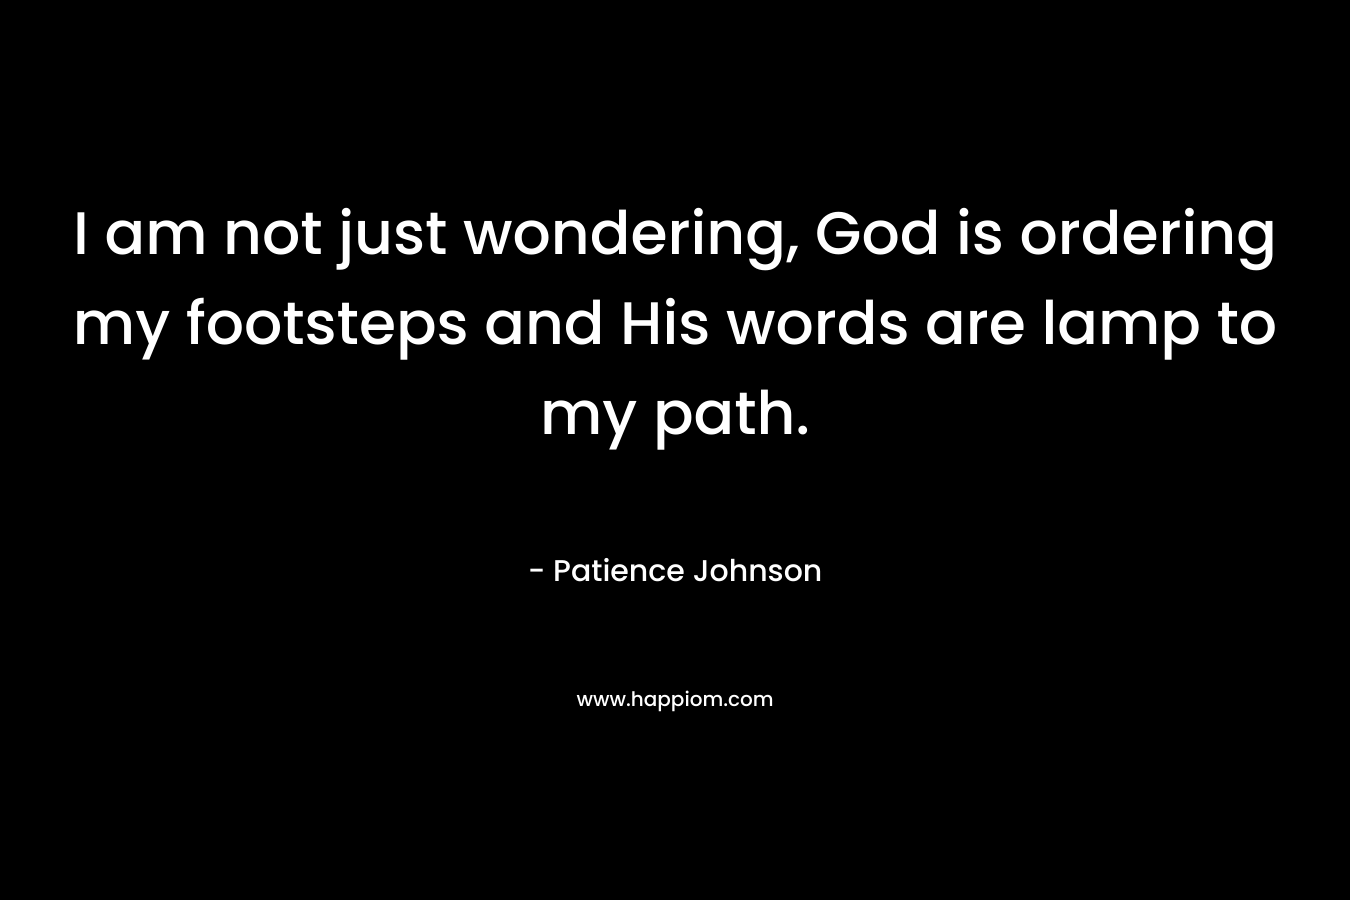 I am not just wondering, God is ordering my footsteps and His words are lamp to my path. – Patience Johnson